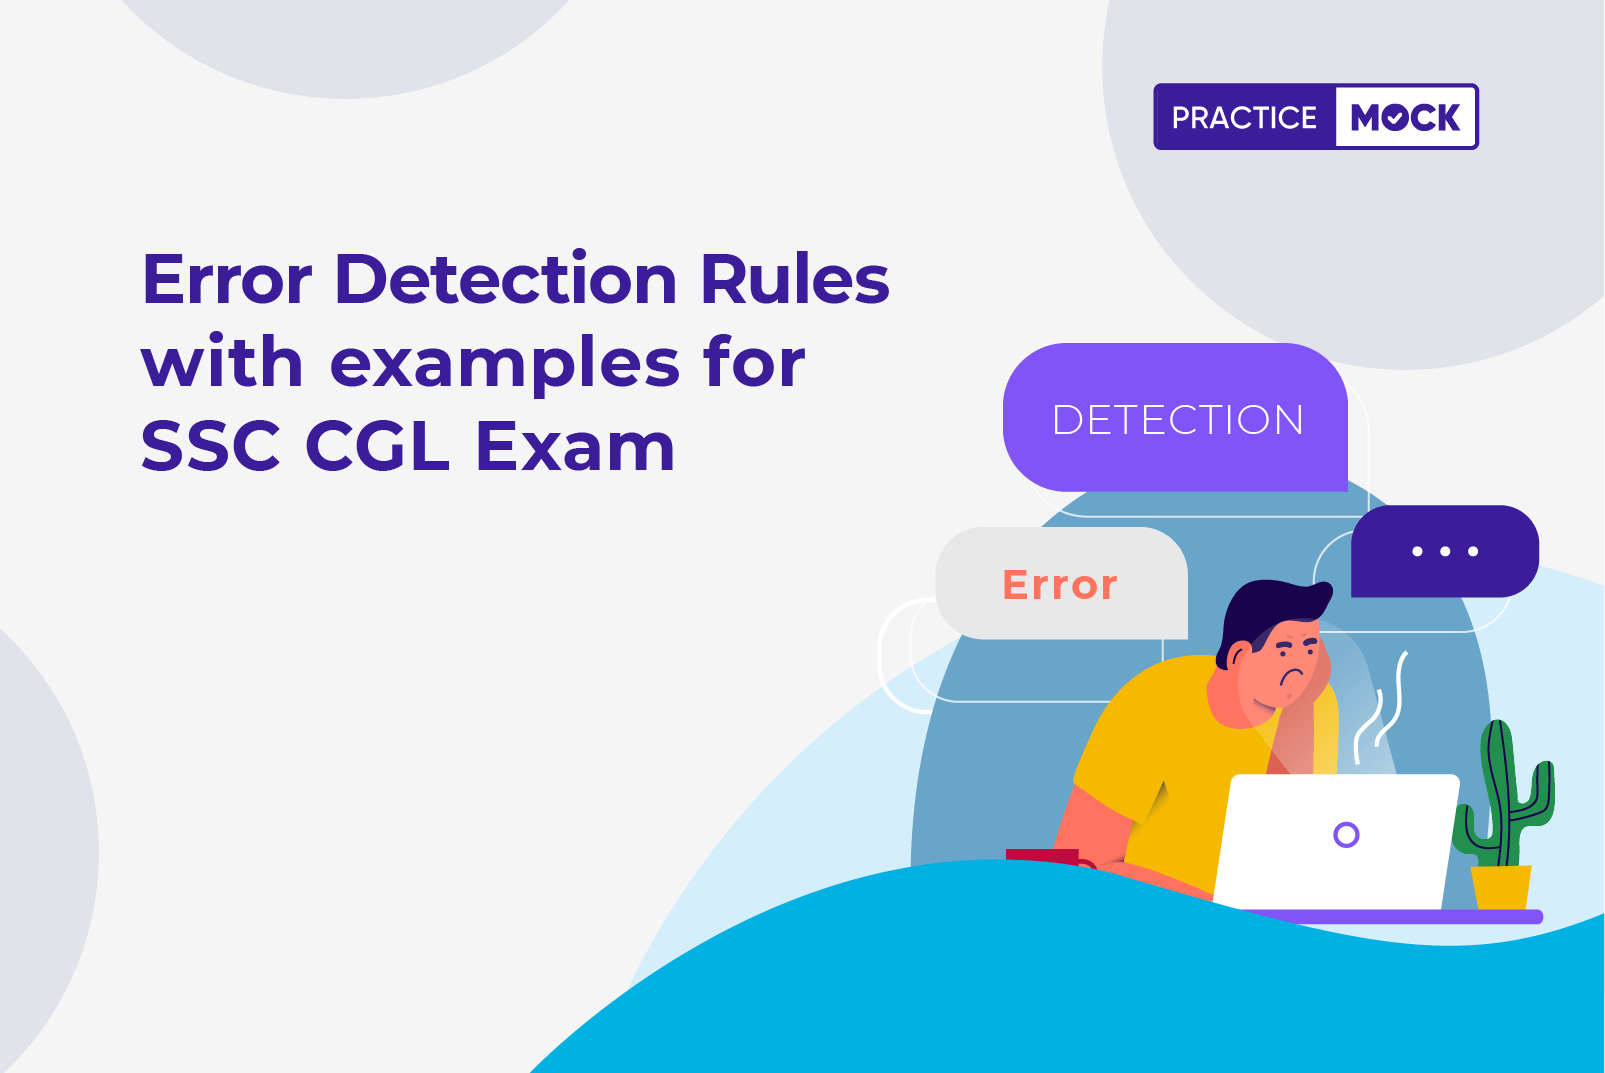 Error Detection Rules with examples for SSC CGL Exam